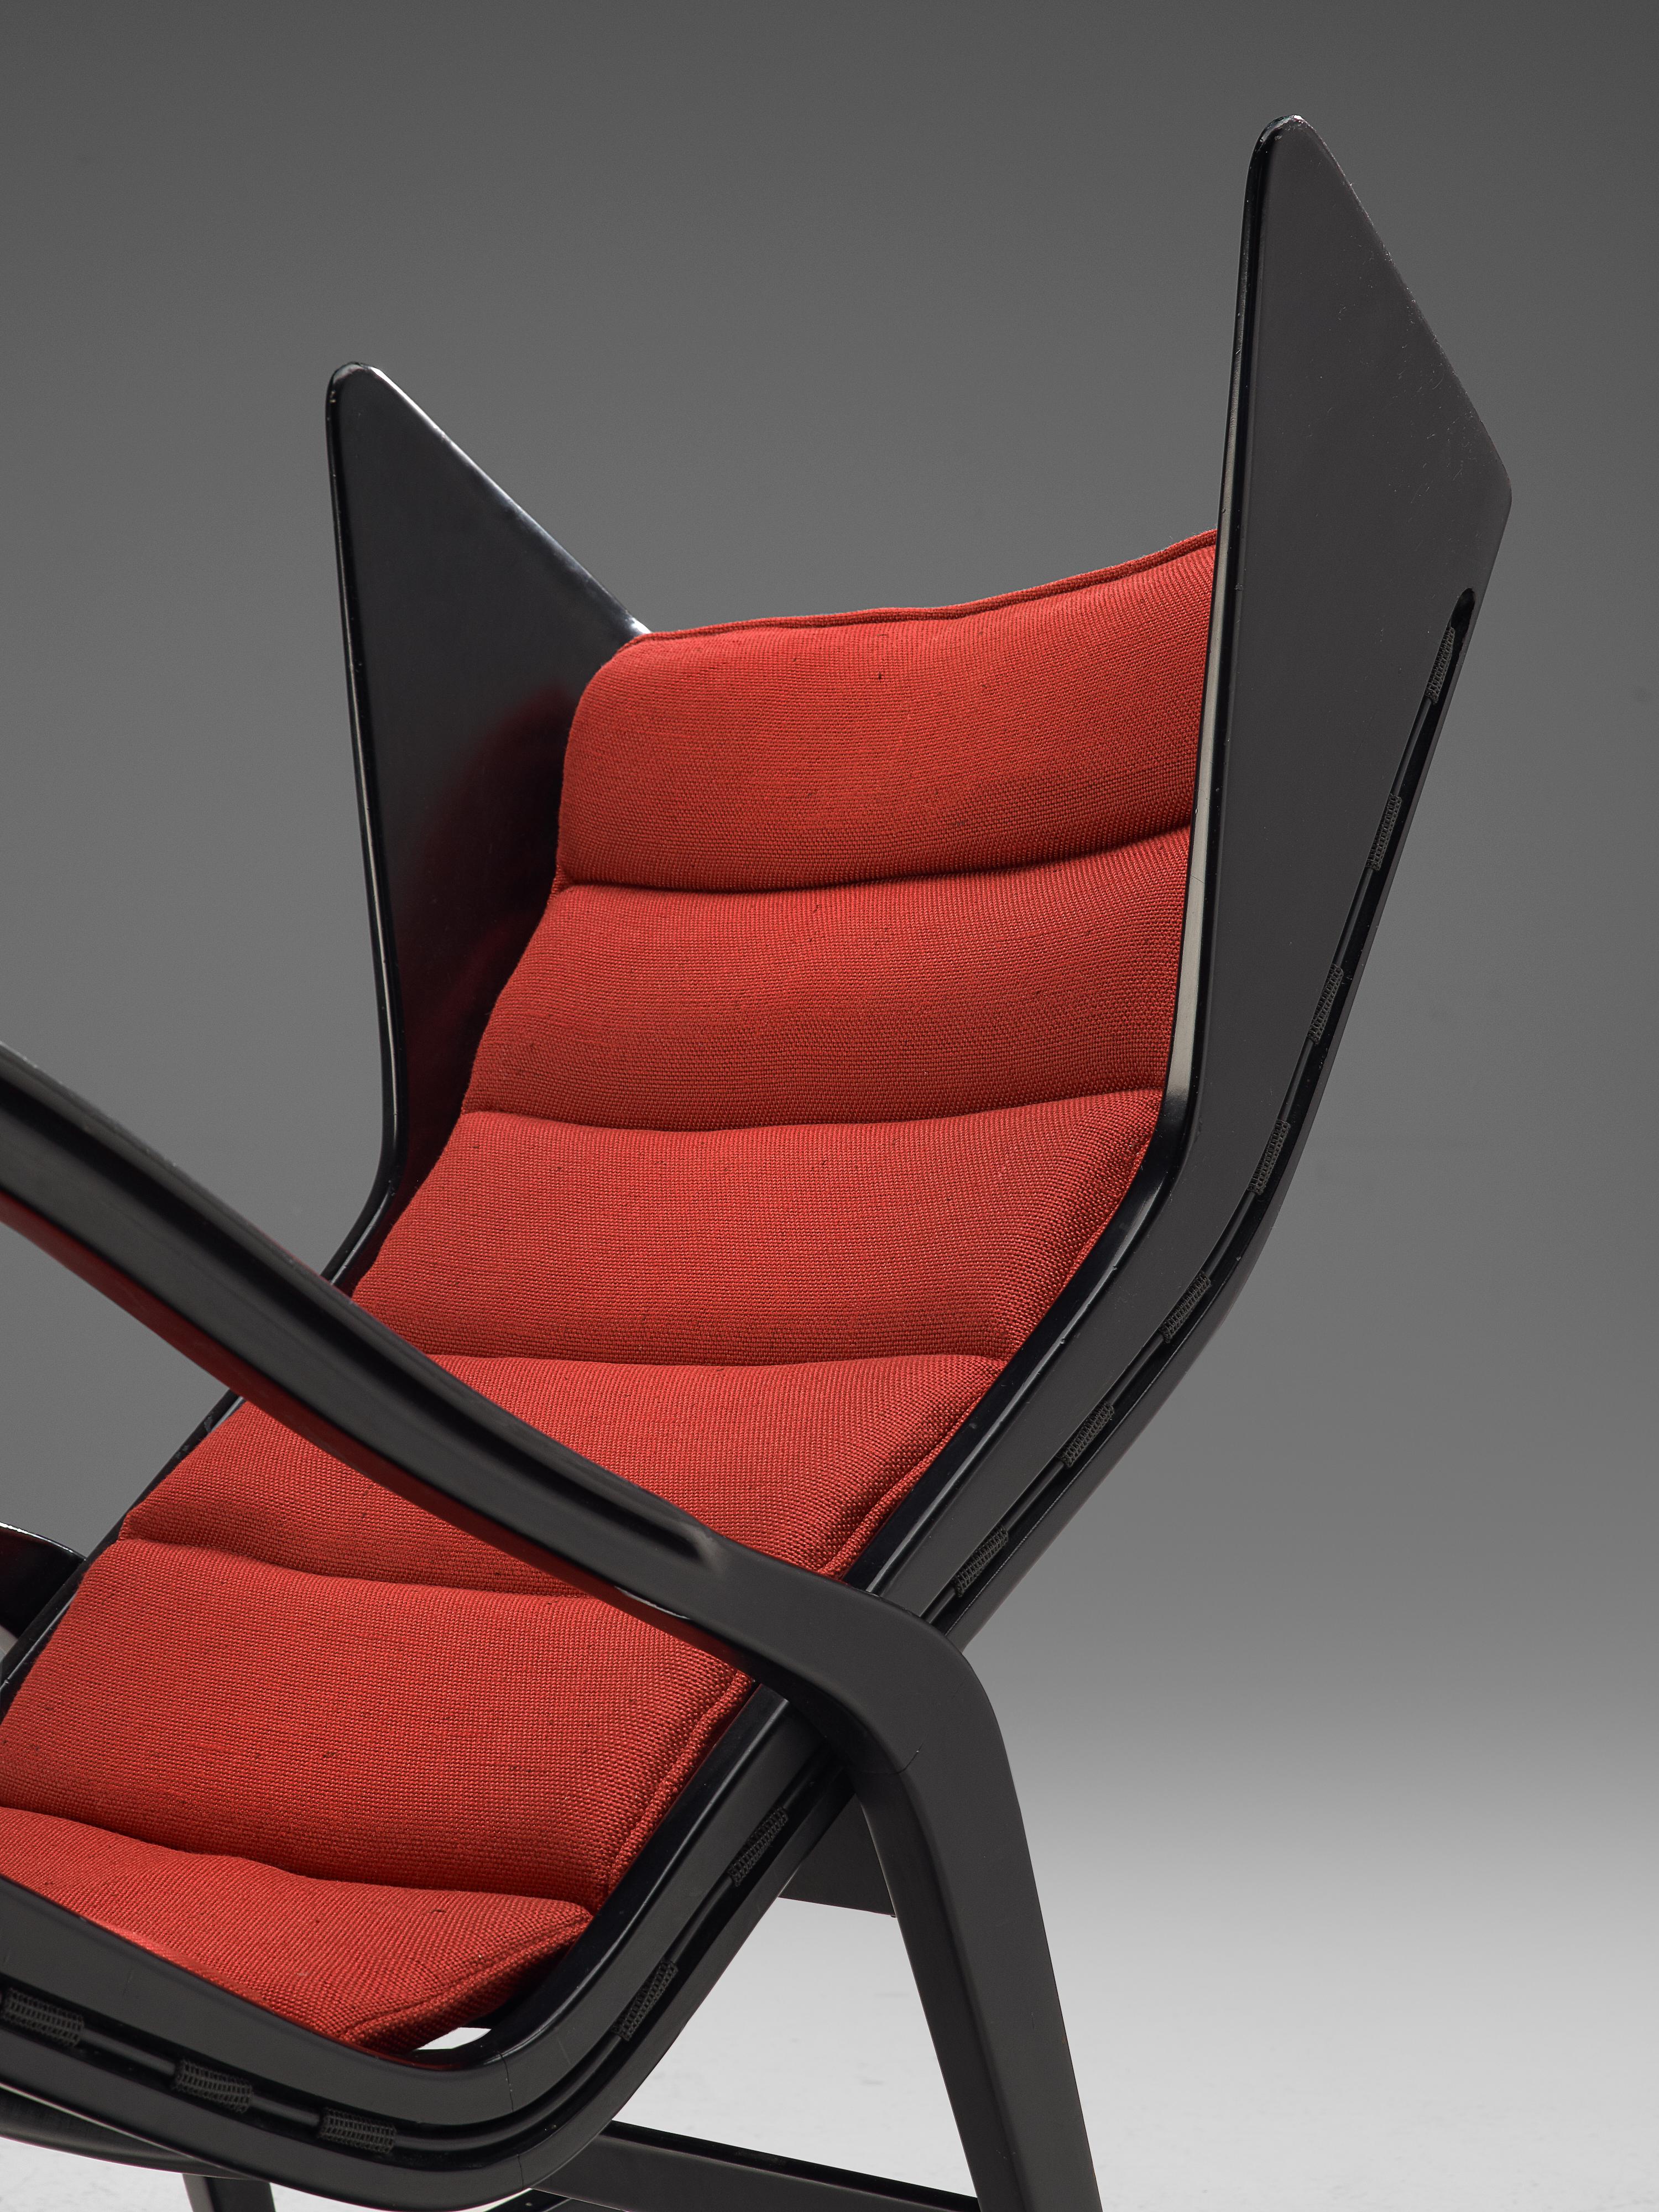 Fabric Studio Cassina '572 Rocking' Chair in Ebonized Wood and Red Upholstery For Sale